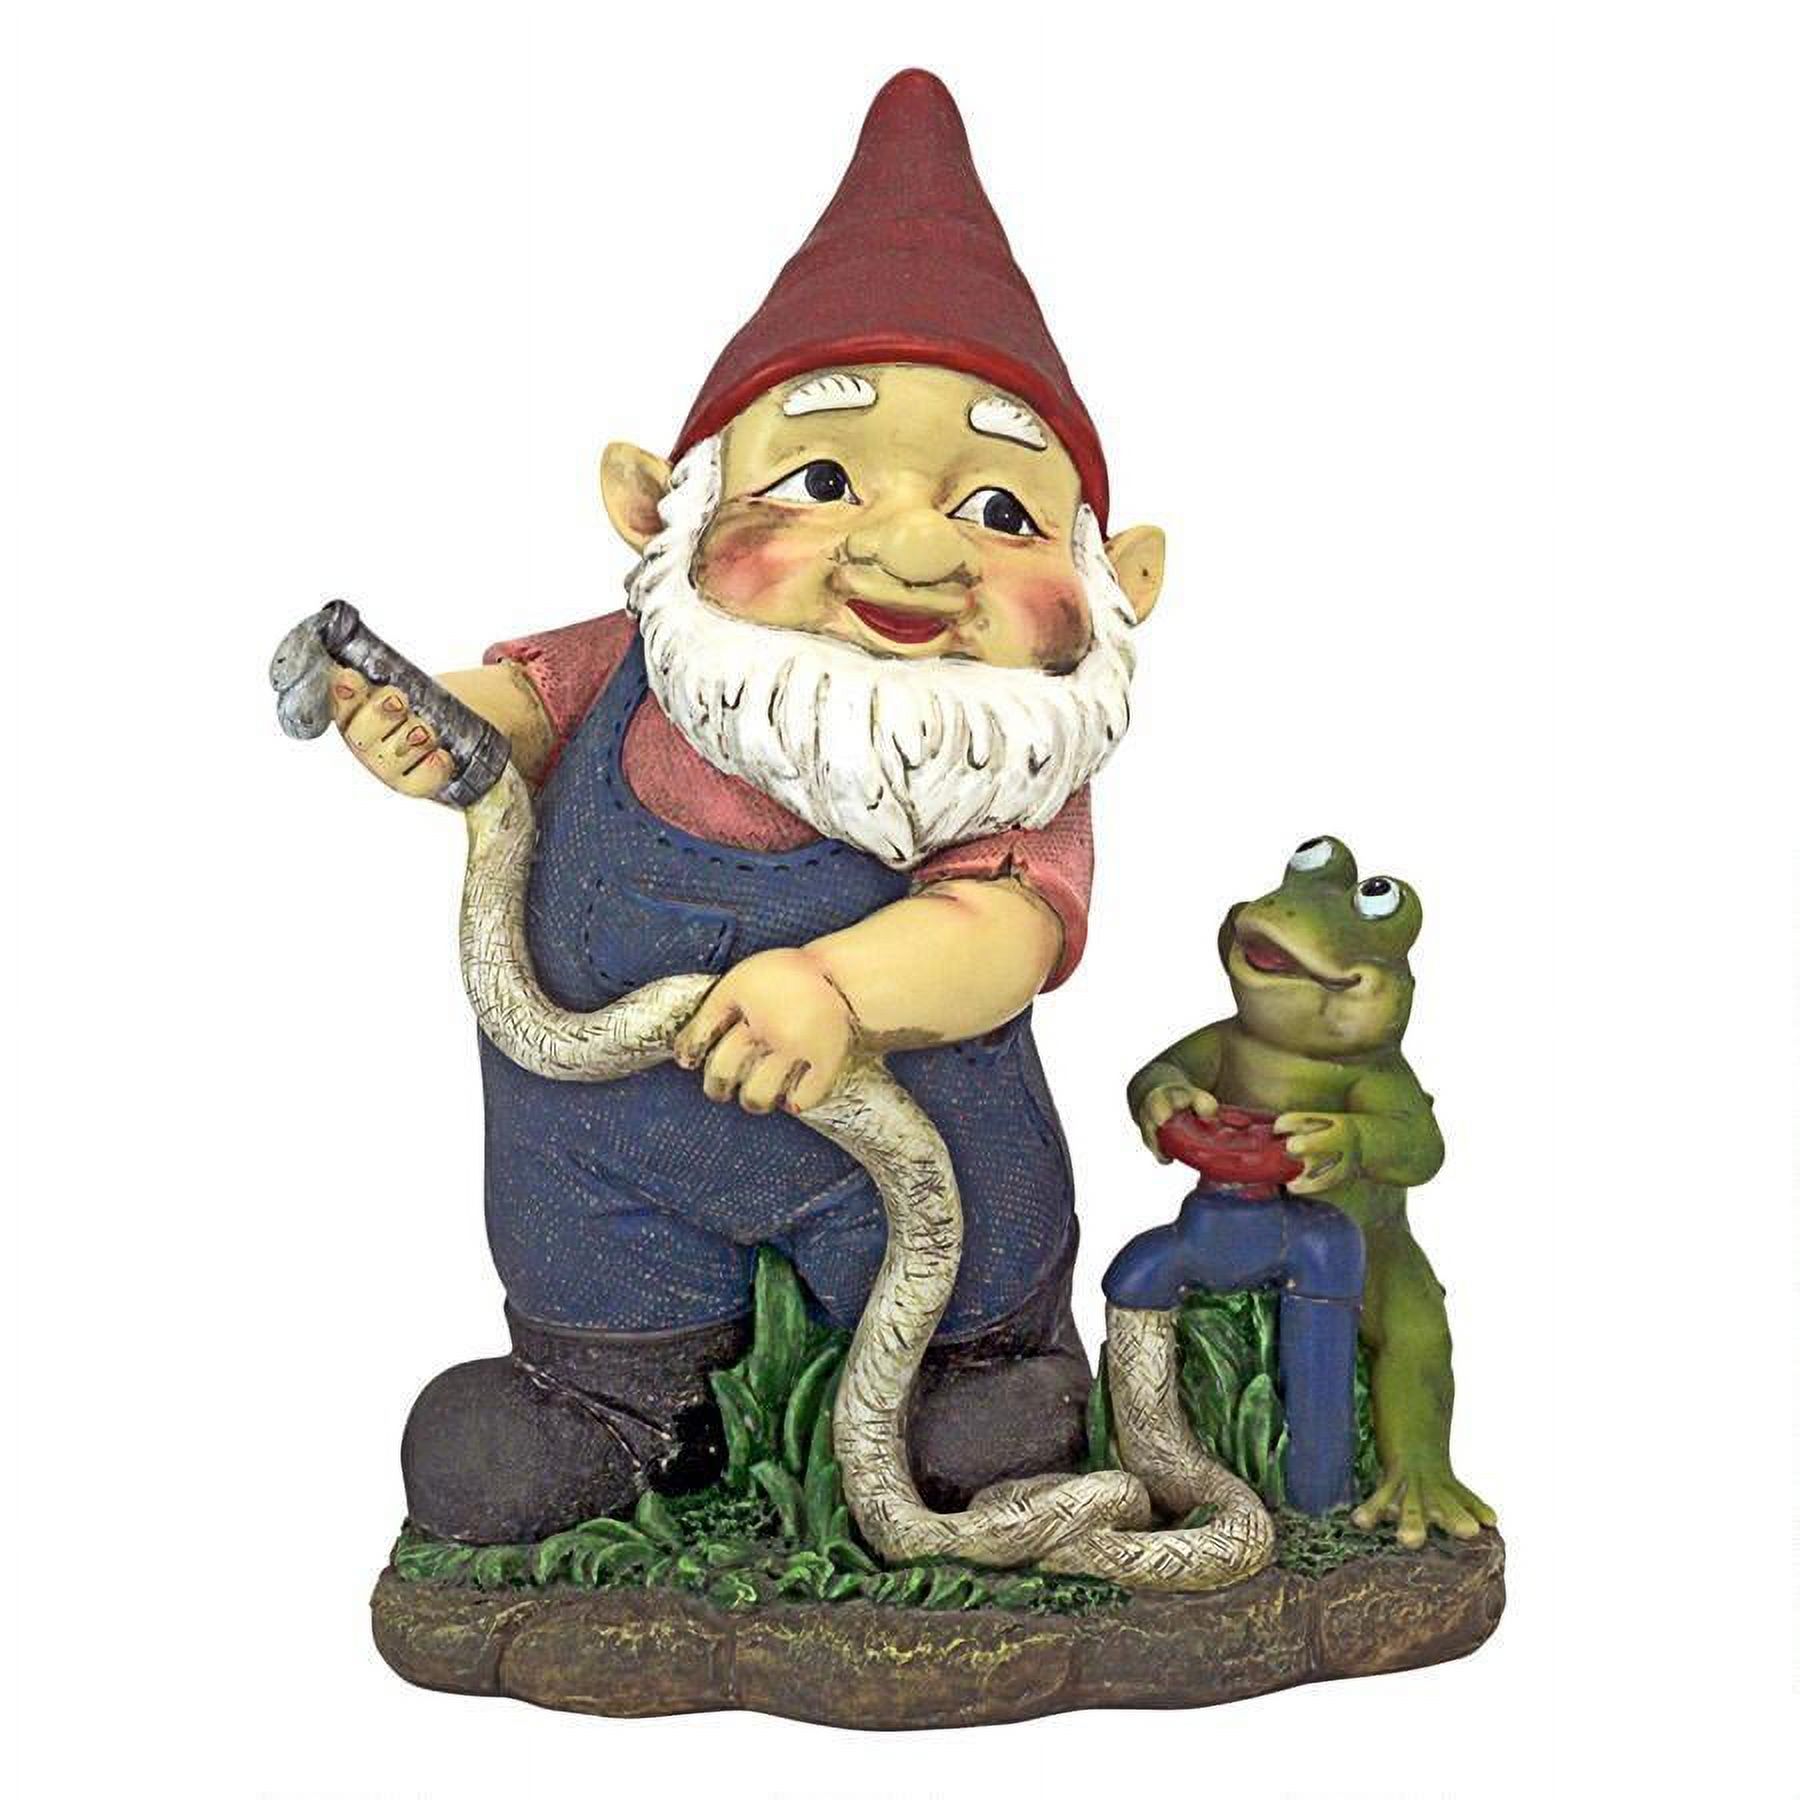 Firefighter Franz And His Frog Fire Brigade Garden Gnome Statue - image 1 of 1